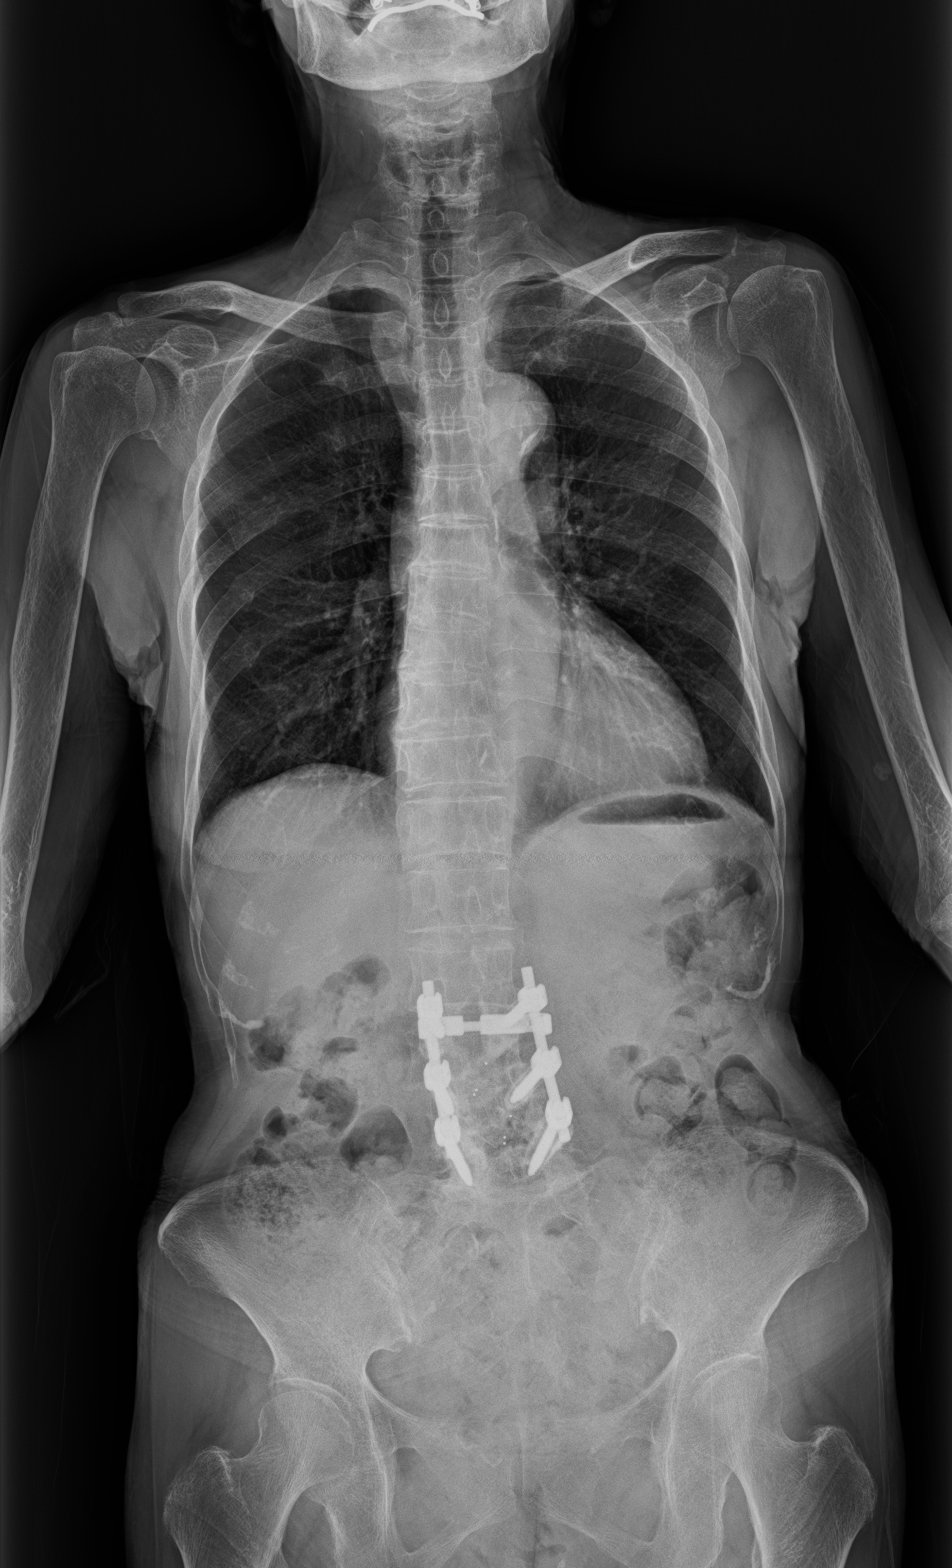 Advances in long-length digital radiography are creating opportunities for visualization during spinal surgery, as well as pre- and post-operatively. Image courtesy of Fujifilm Medical Systems